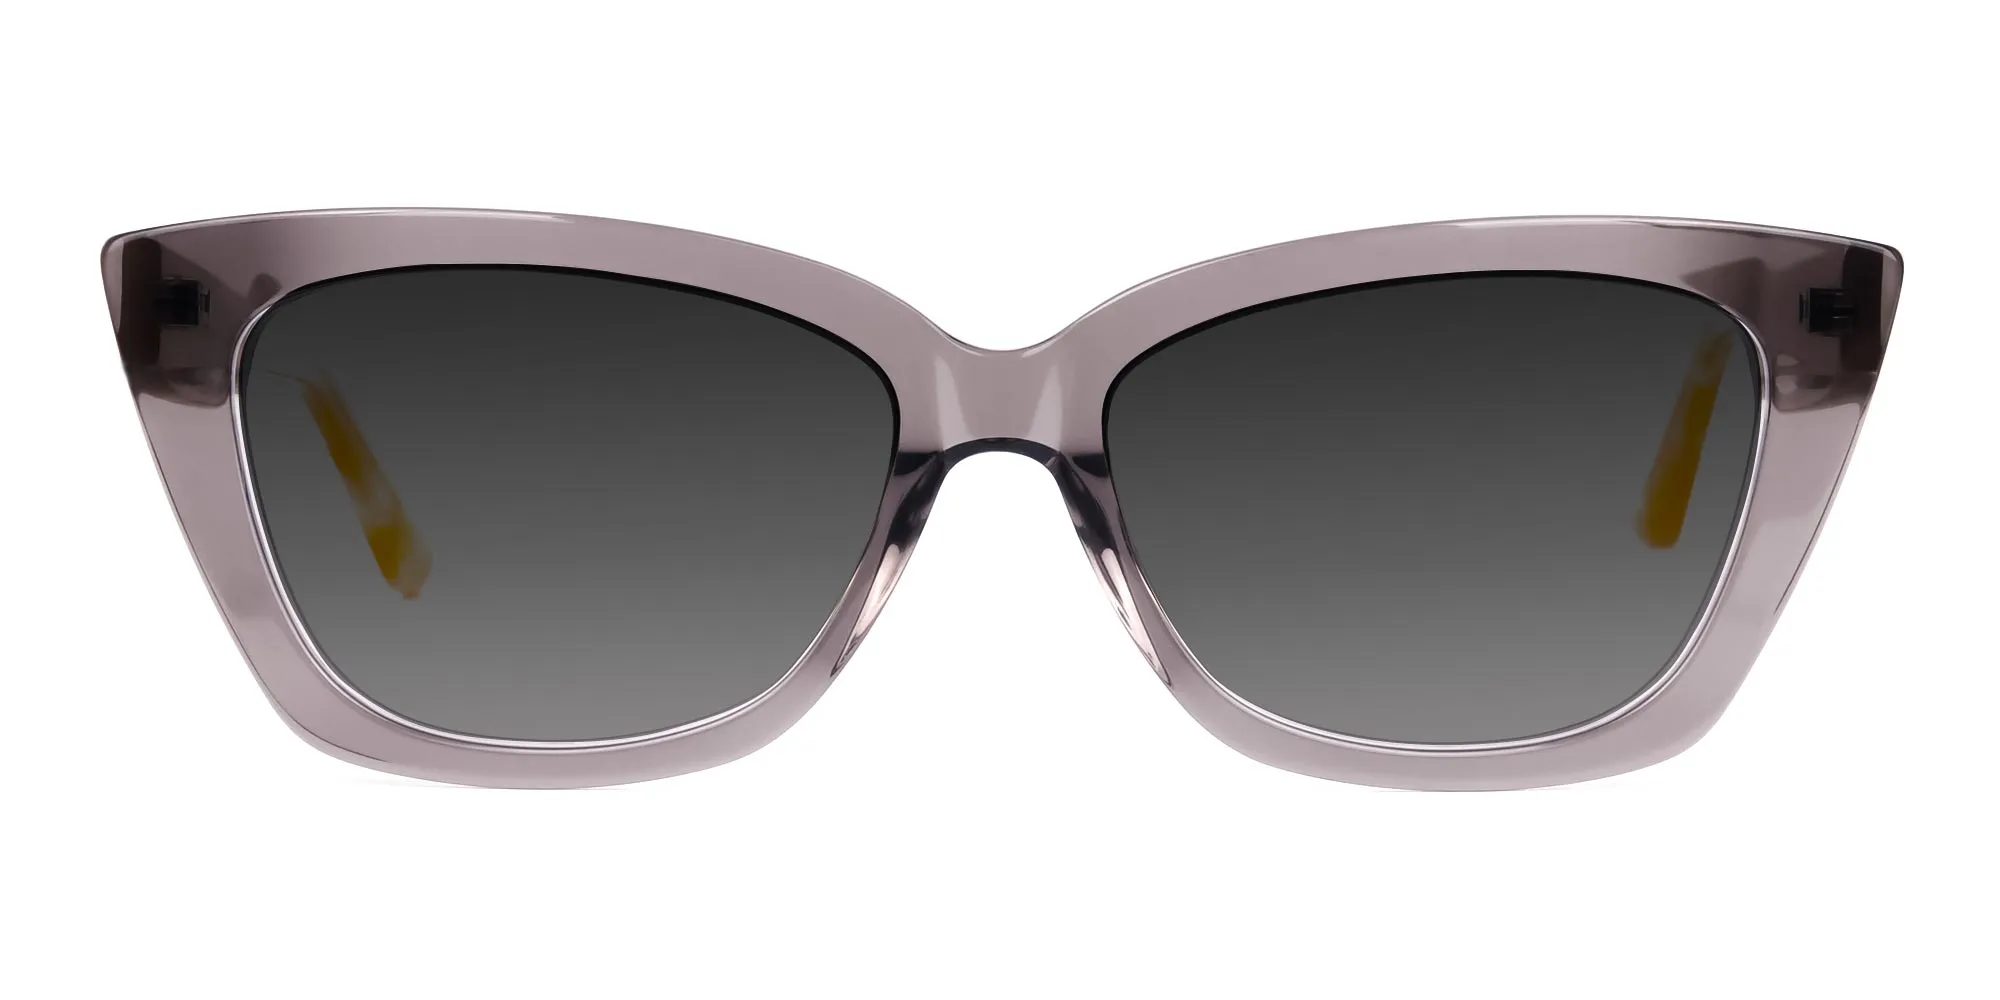 Brown Cat Eye Sunglasses in Grey Colour & Grey Tint-2